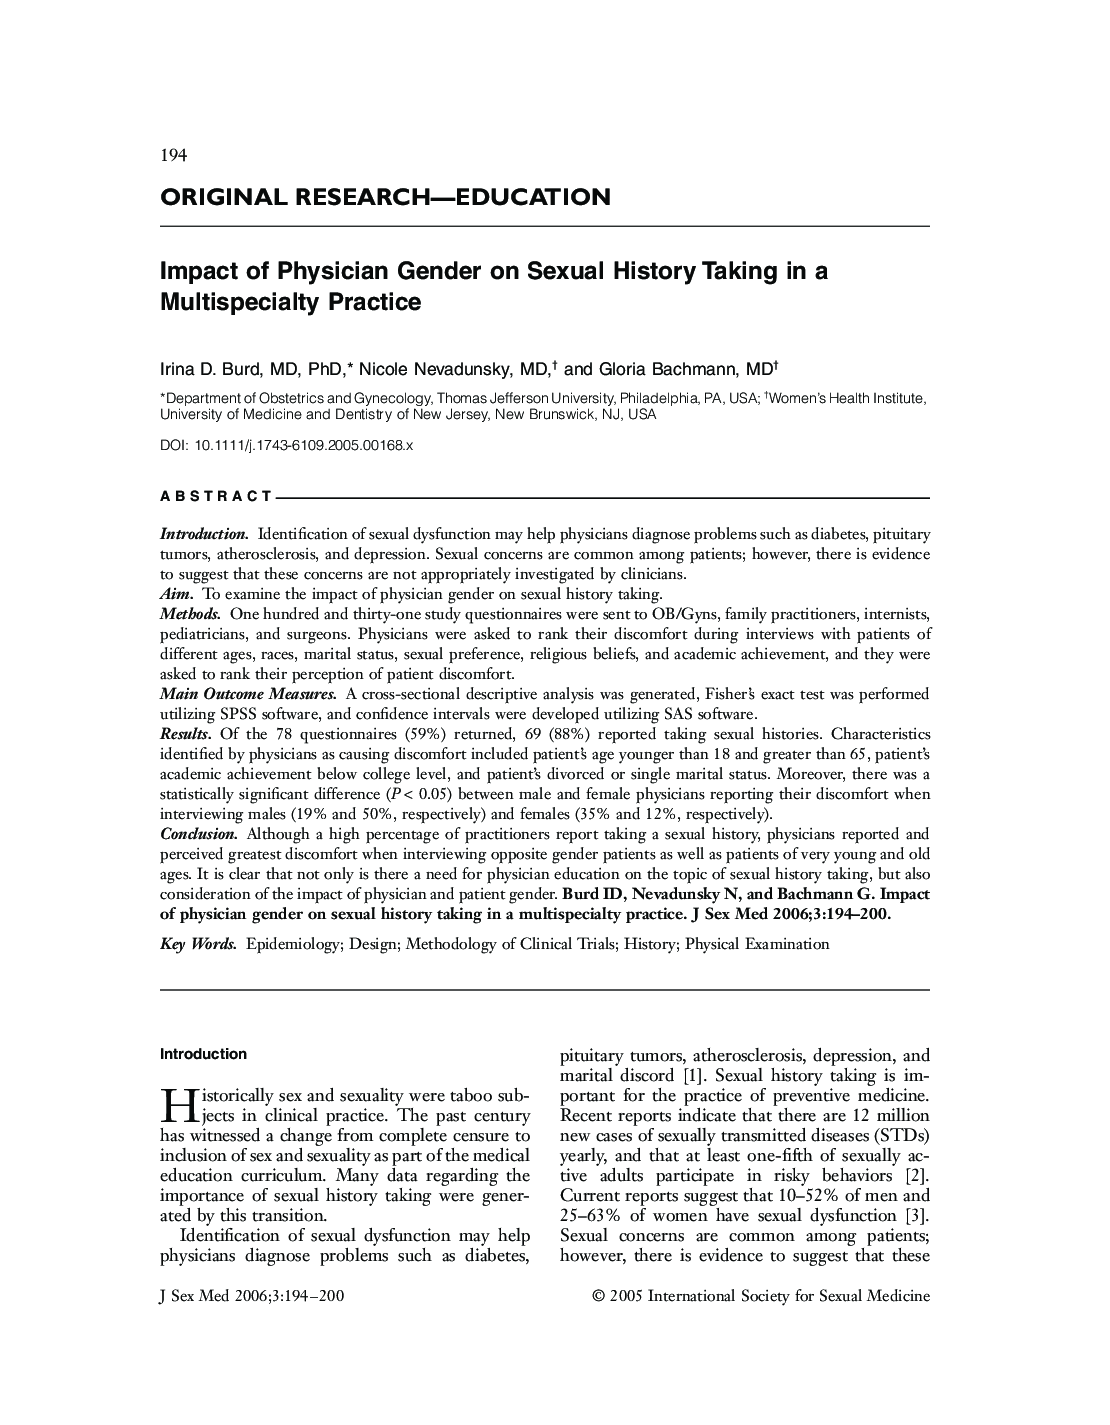 ORIGINAL RESEARCH-EDUCATION: Impact of Physician Gender on Sexual History Taking in a Multispecialty Practice